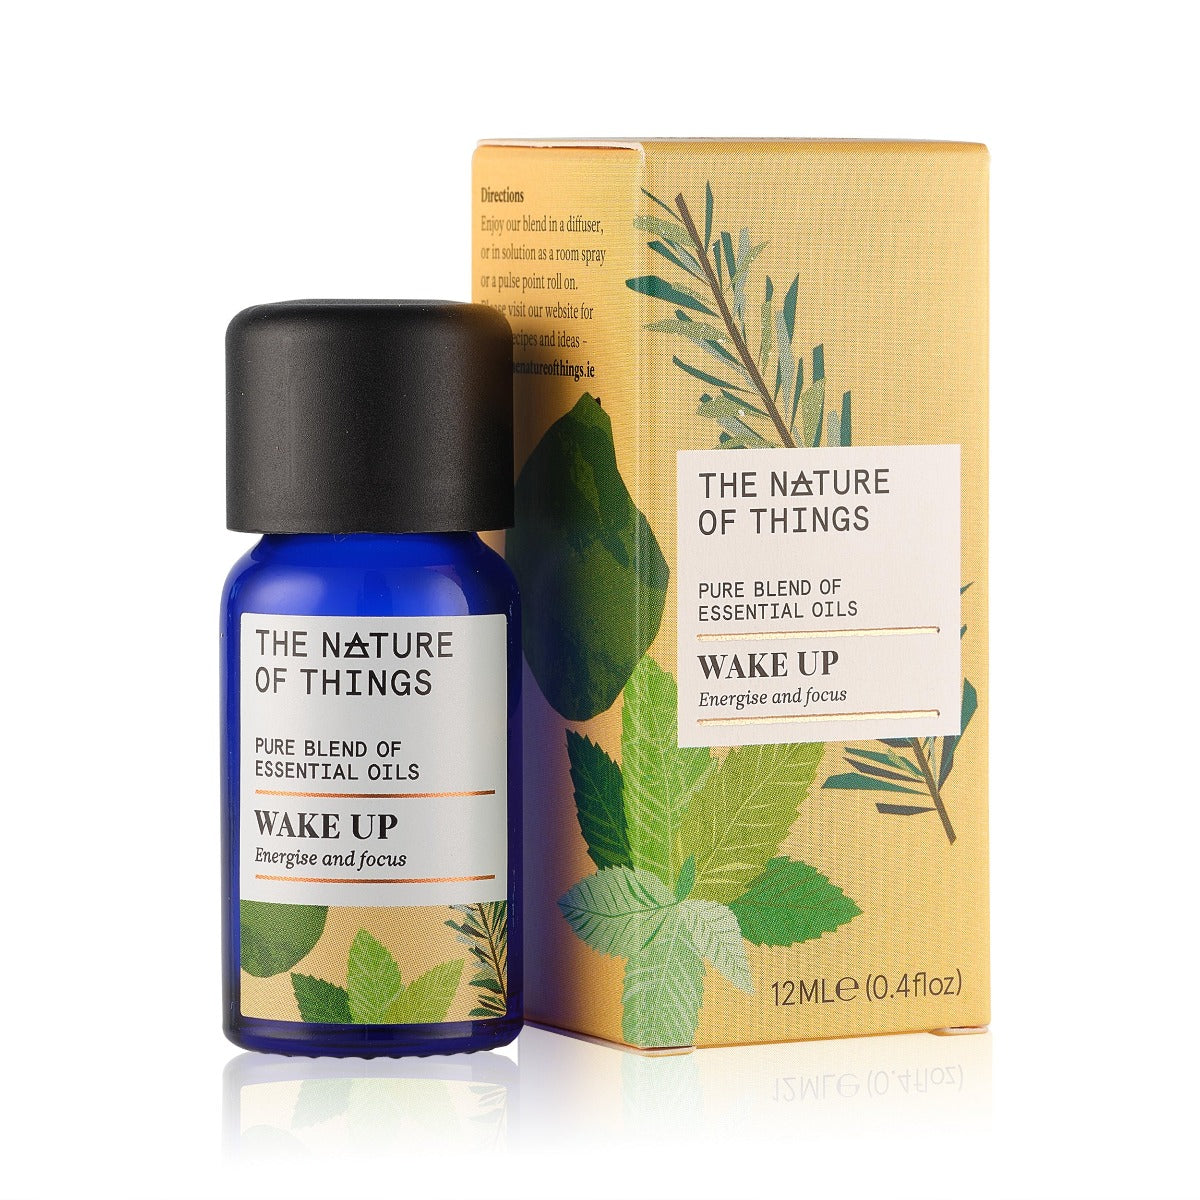 Wake Up Essential Oil Blend from The Nature Of Things